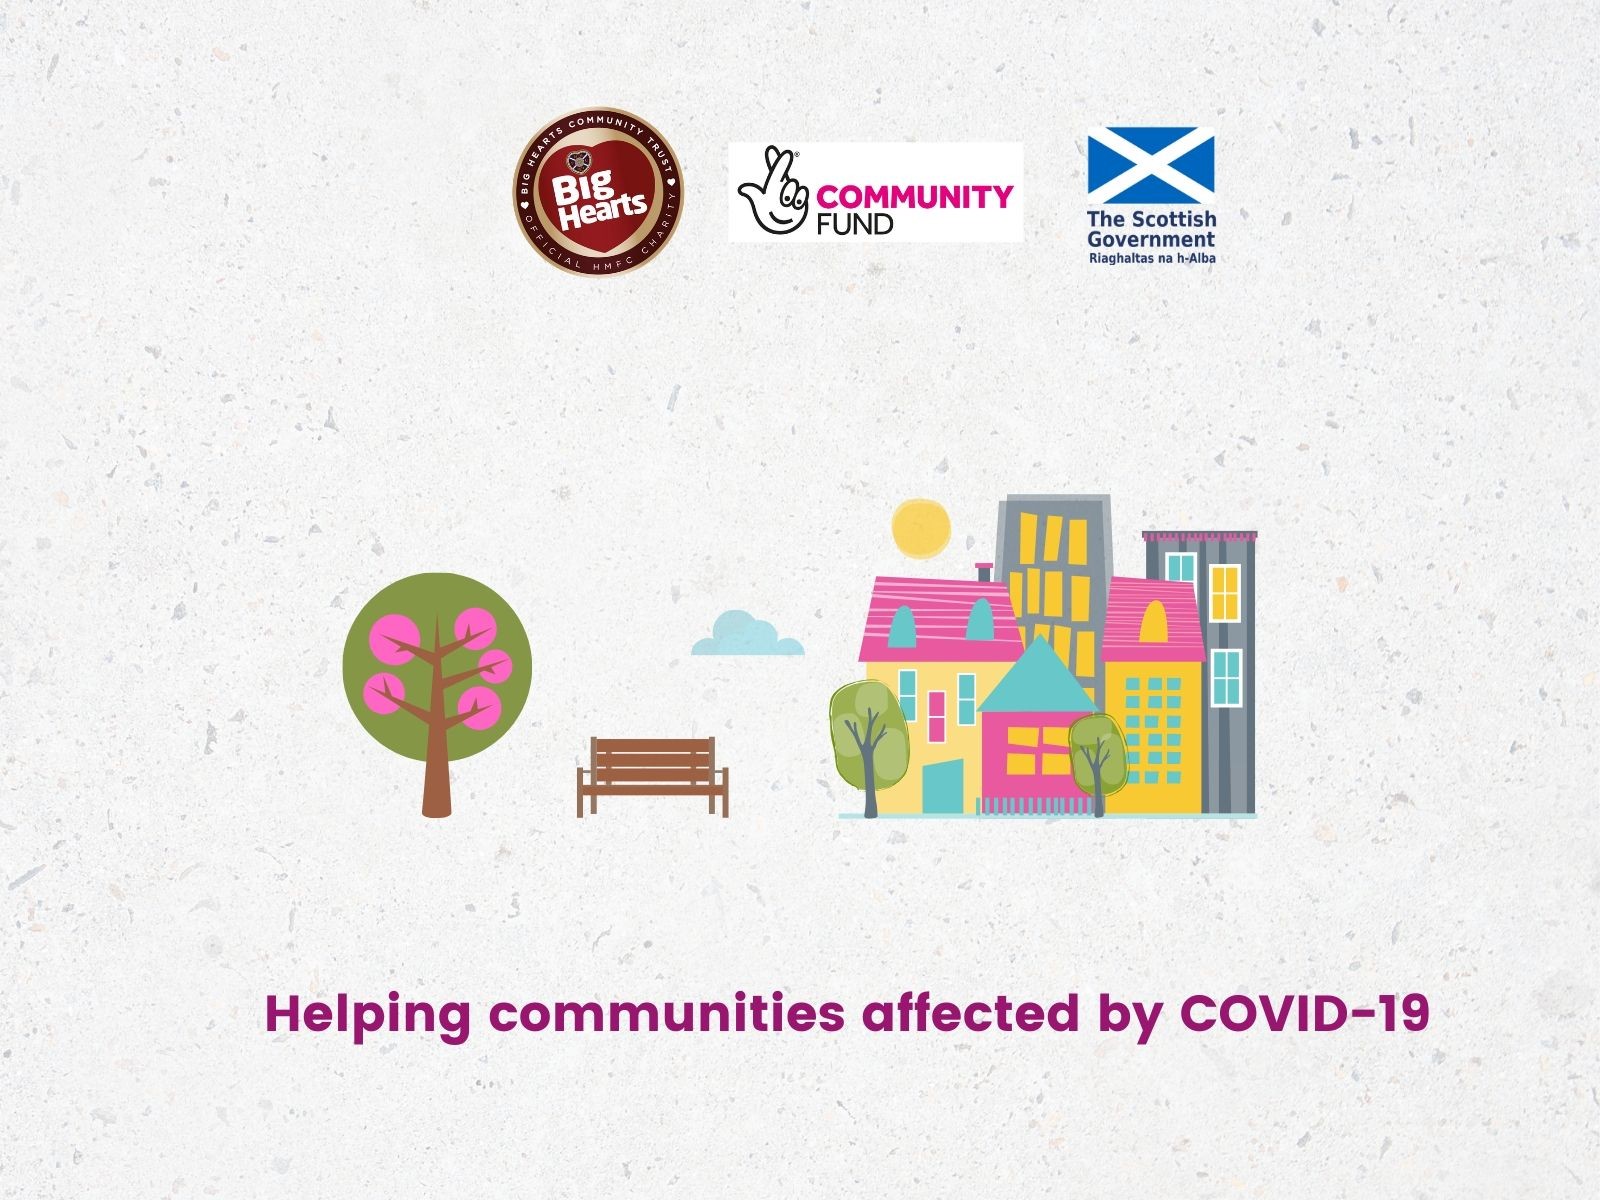  » Big Hearts to distribute Covid-19 funds to Gorgie/Dalry groups